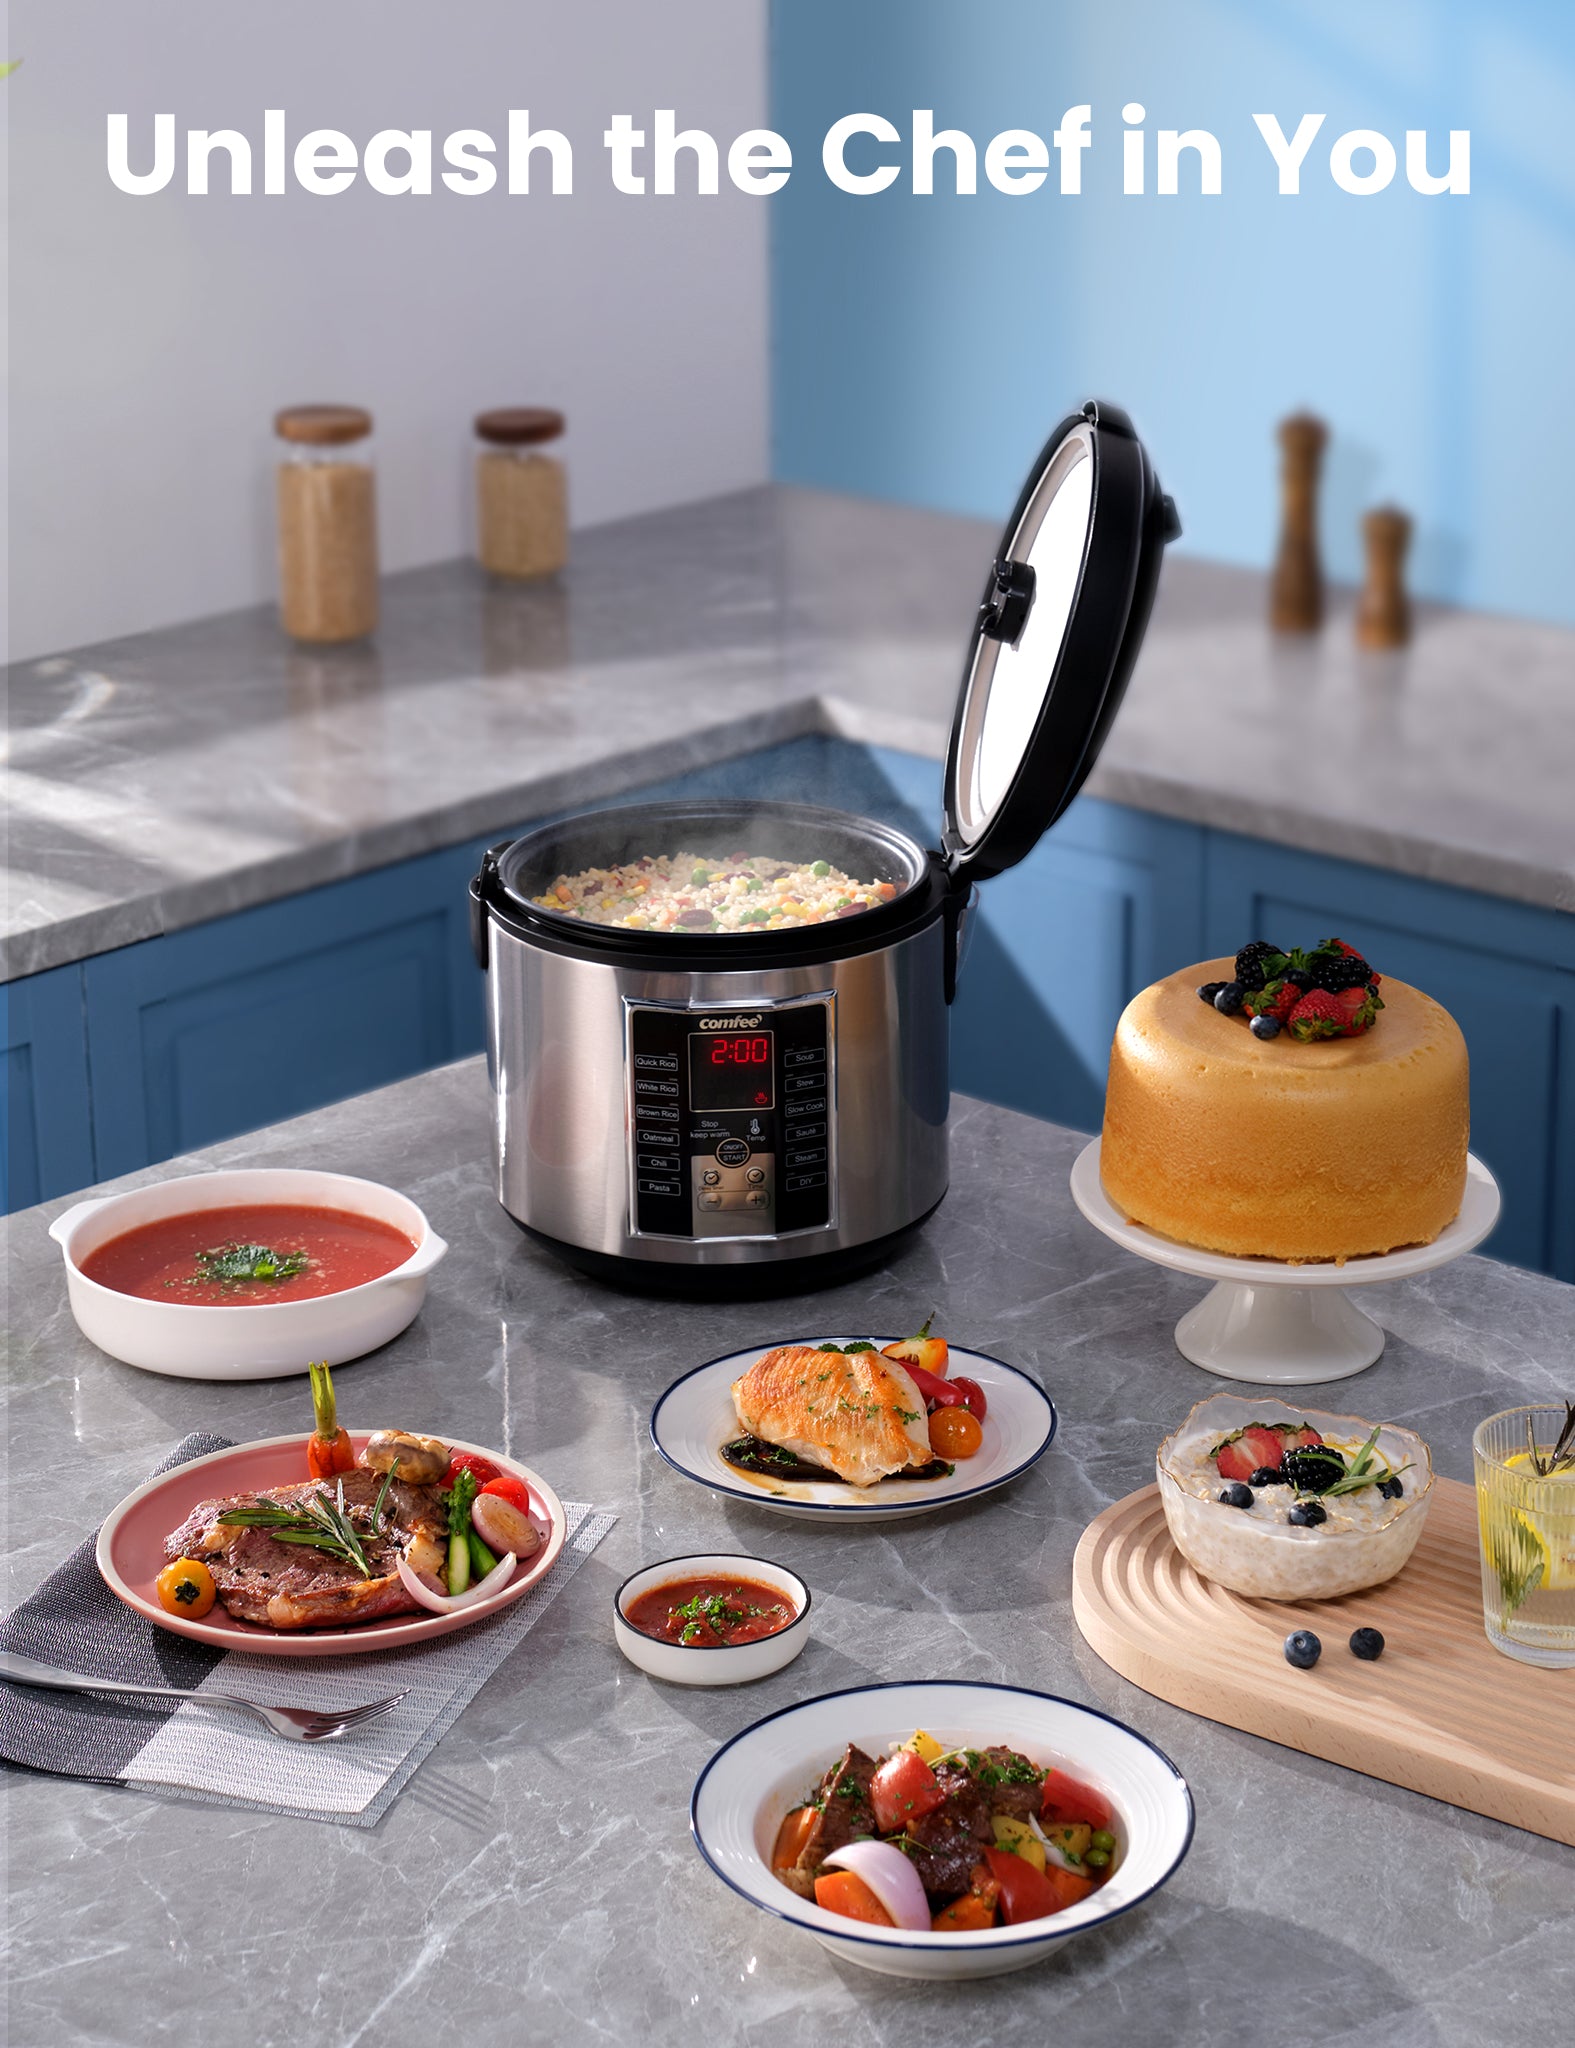 COMFEE' Rice Cooker, 6-in-1 Stainless Steel Multi Cooker, Slow Cooker,  Steamer, Saute, and Warmer, 2 QT, 8 Cups Cooked(4 Cups Uncooked), Brown  Rice